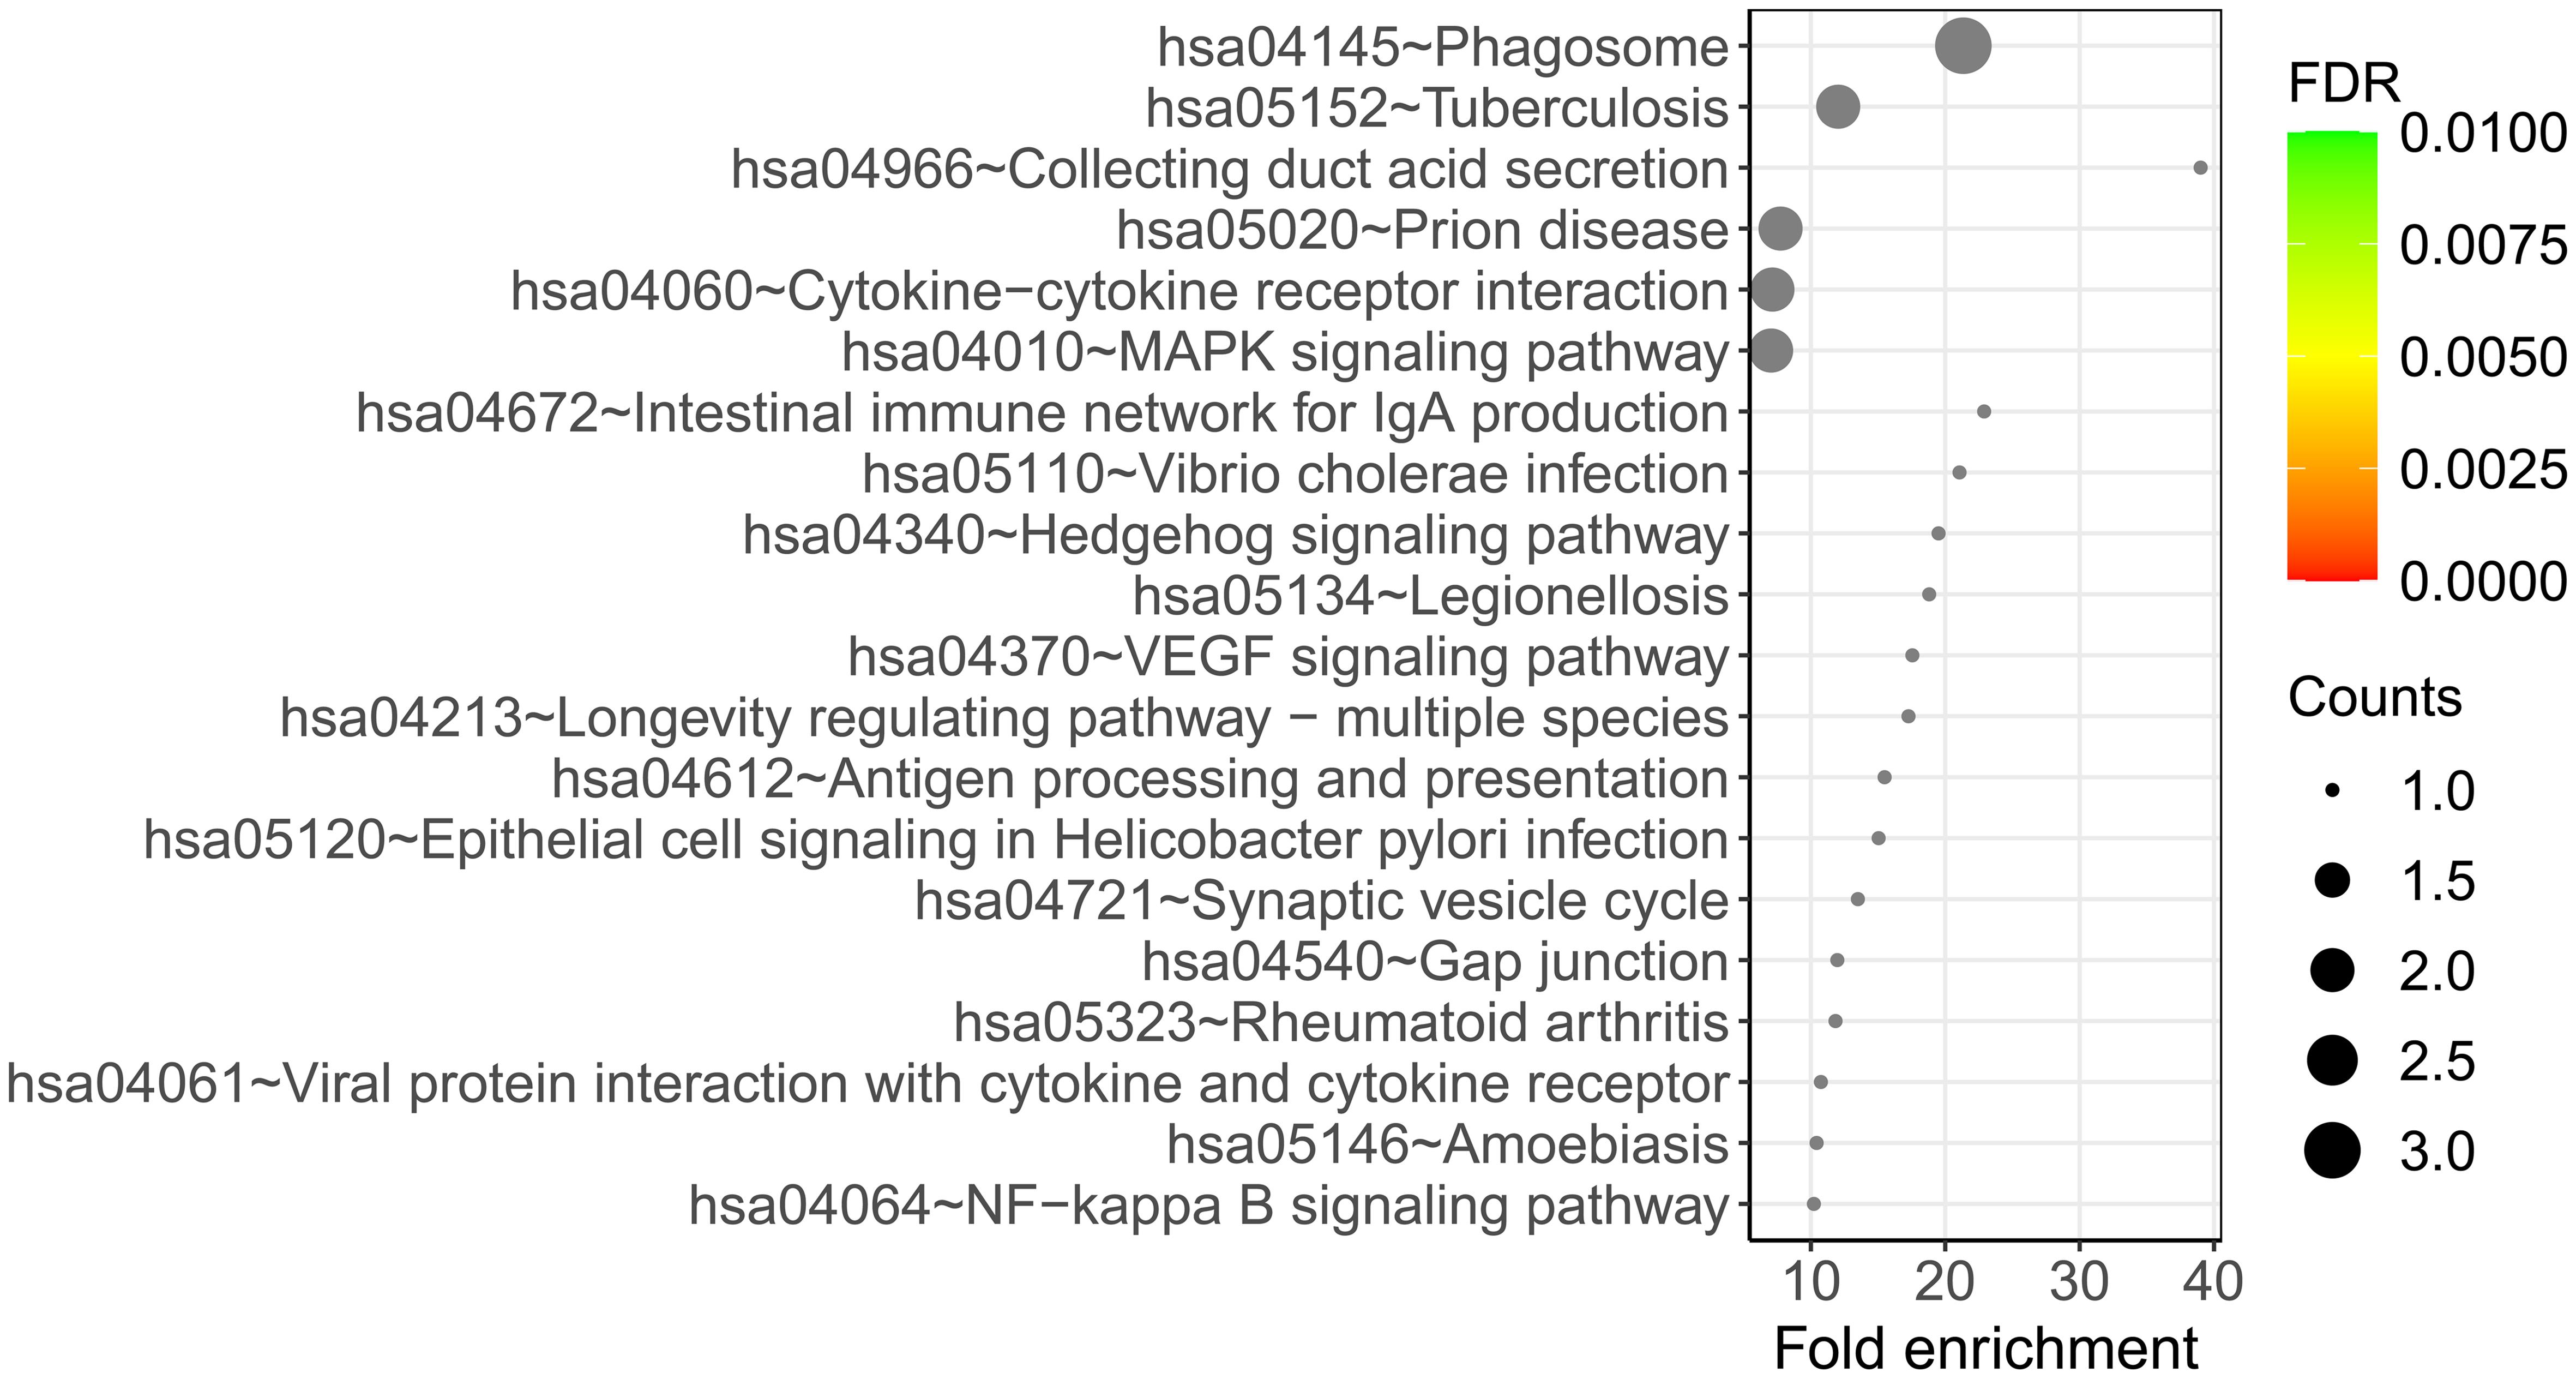 Enrichment Analysis via KEGG: Functional annotation of dysregulated genes providing insights into the most relevant pathways or biological functions involved in AD.